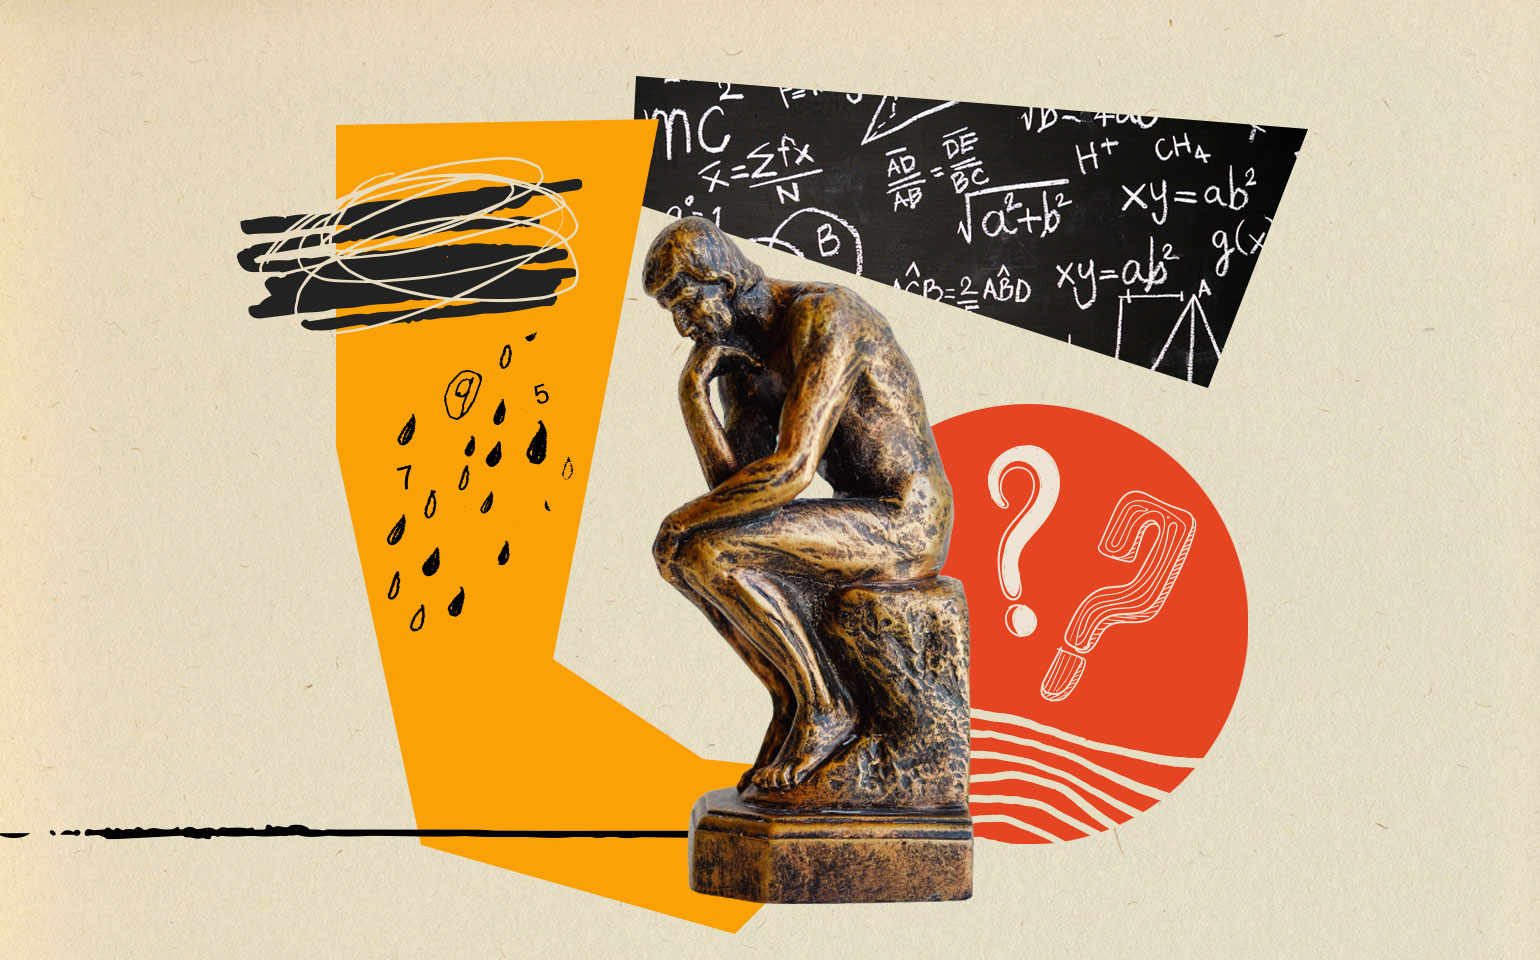 Some question marks and a statue are shown to represent test-taking and thinking.